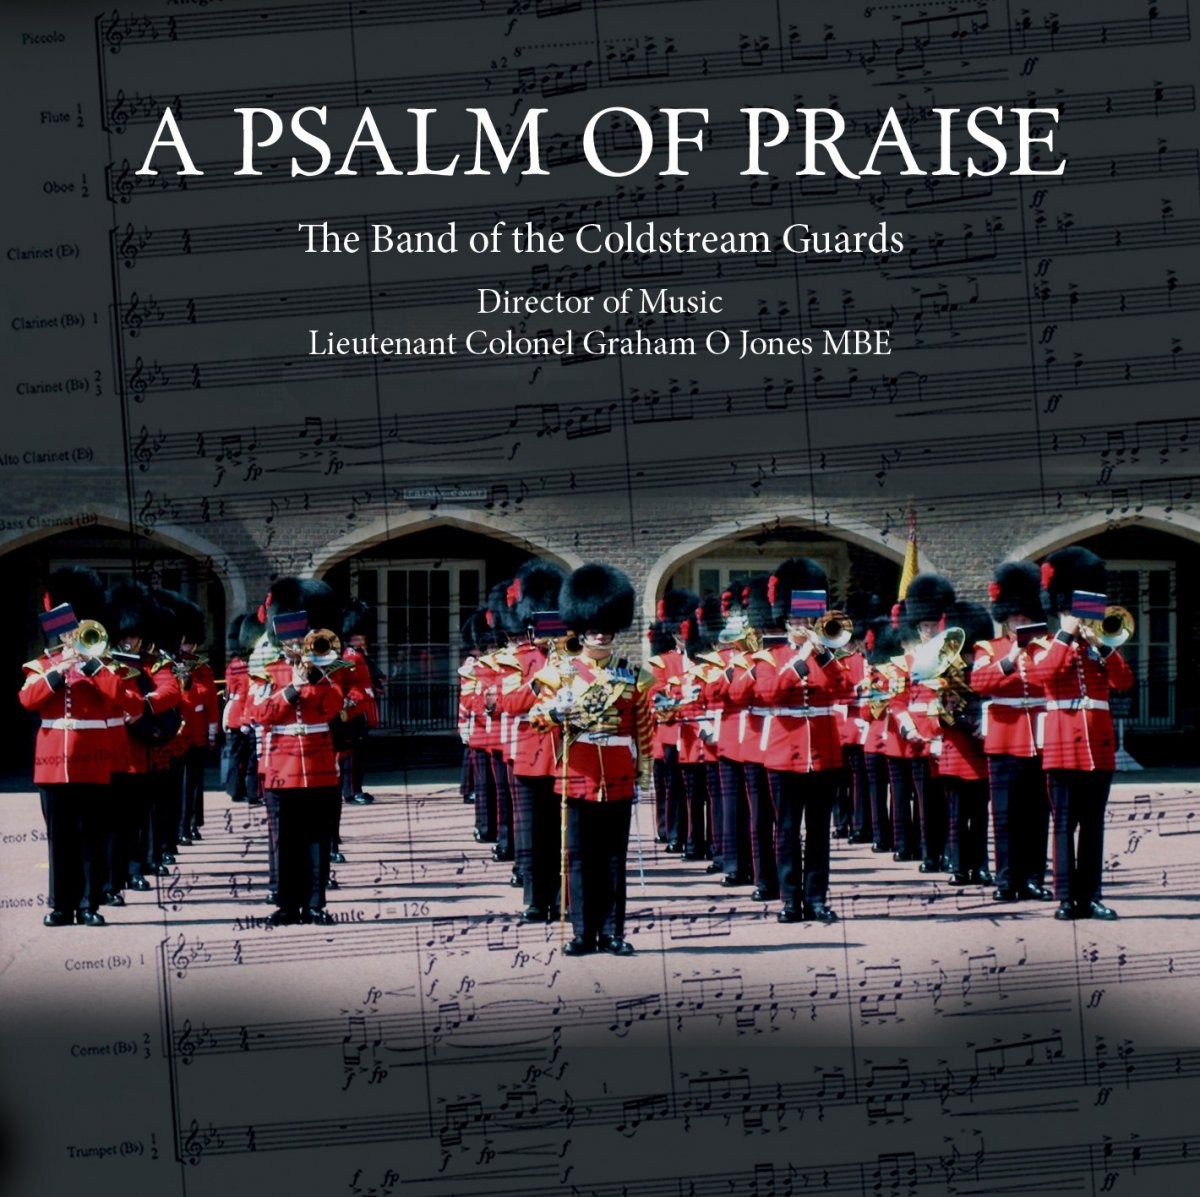 A Psalm of Praise - click here